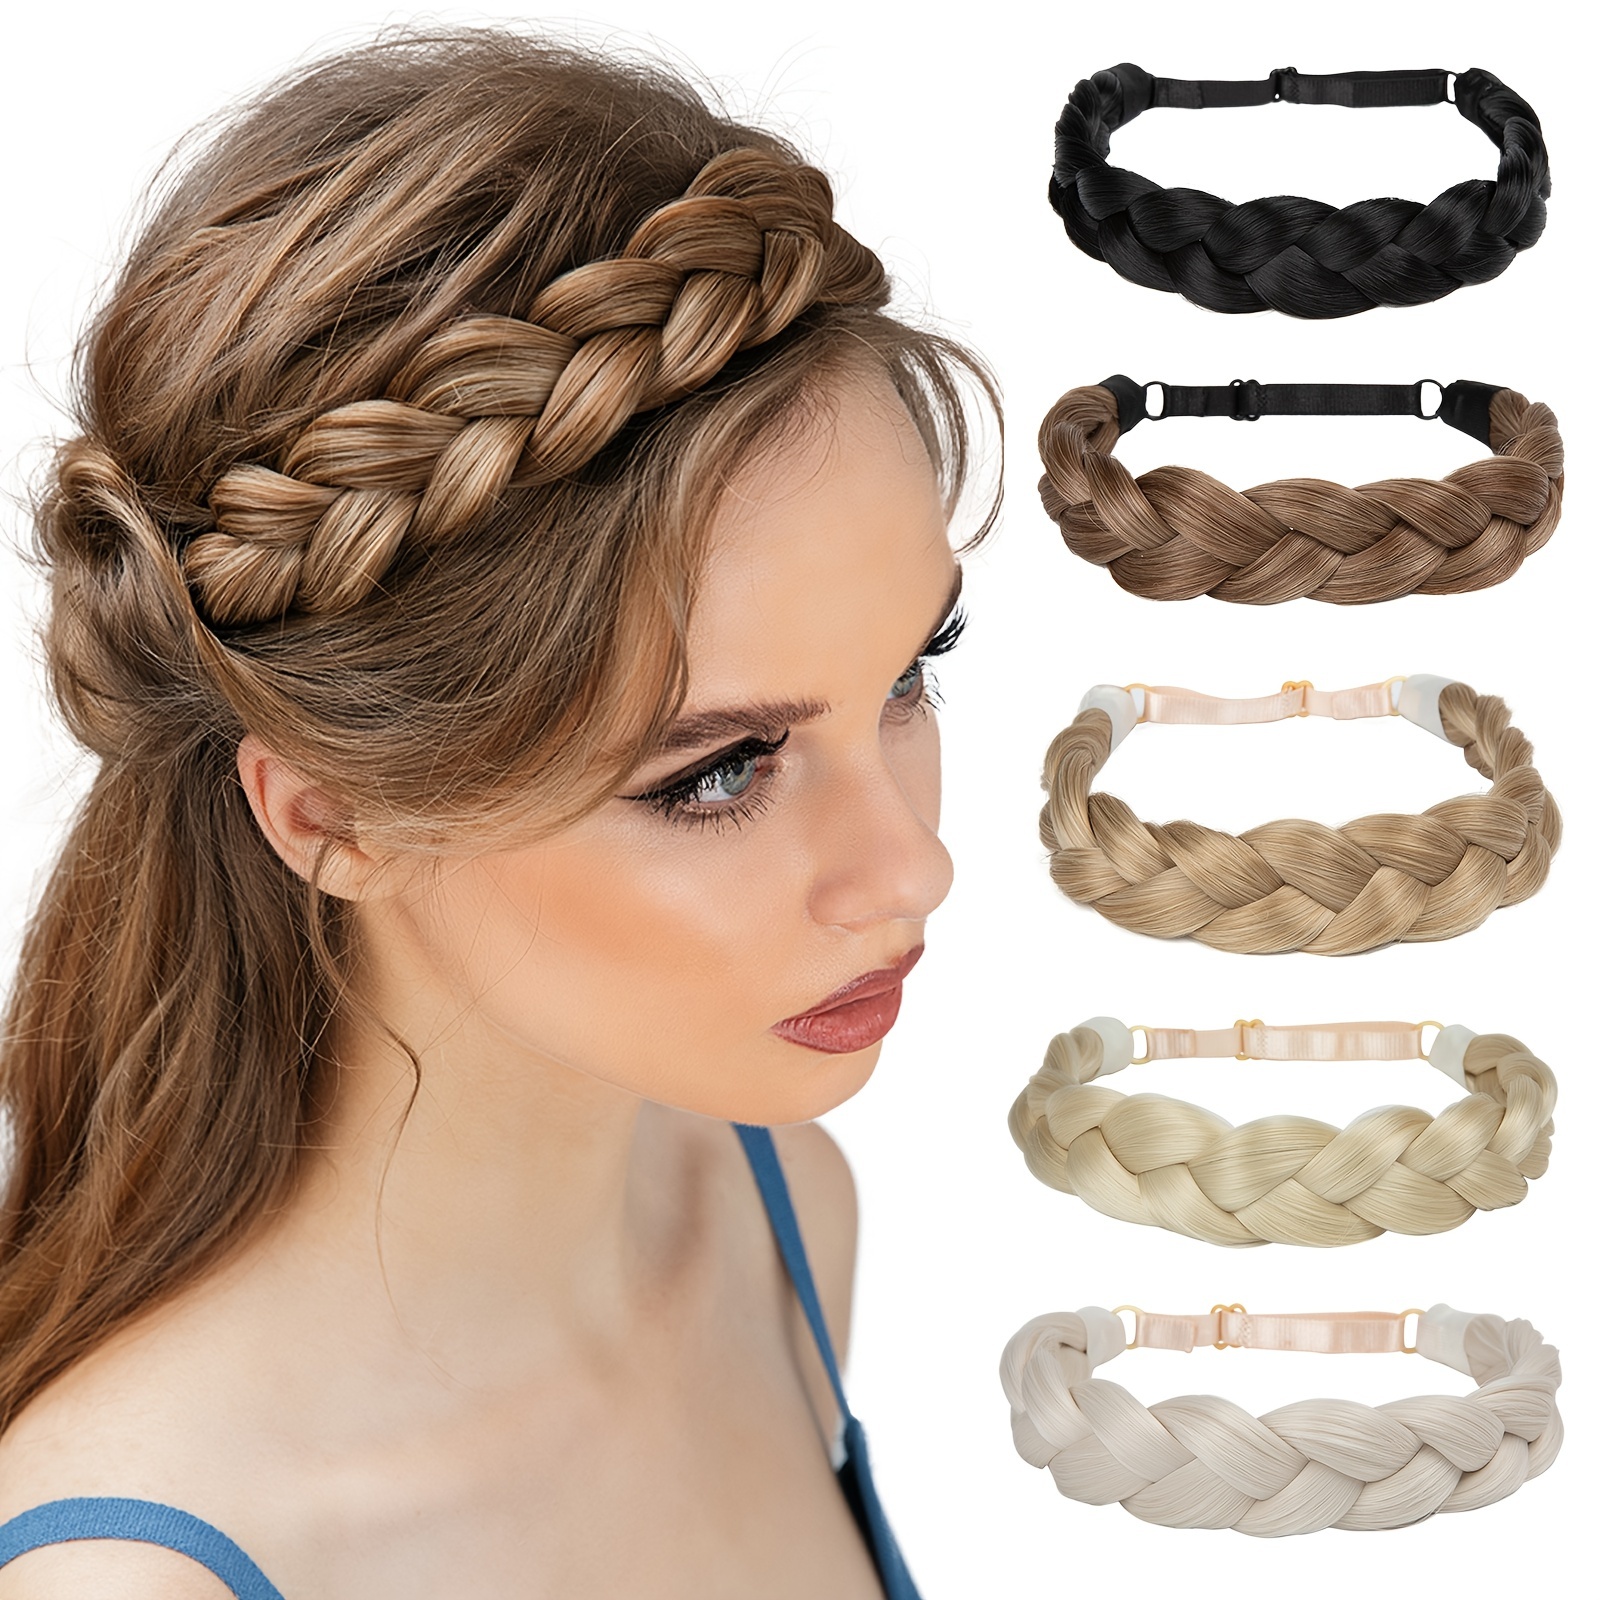 French Knotted Headbands For Women Or Girl Fashion Twist Braided